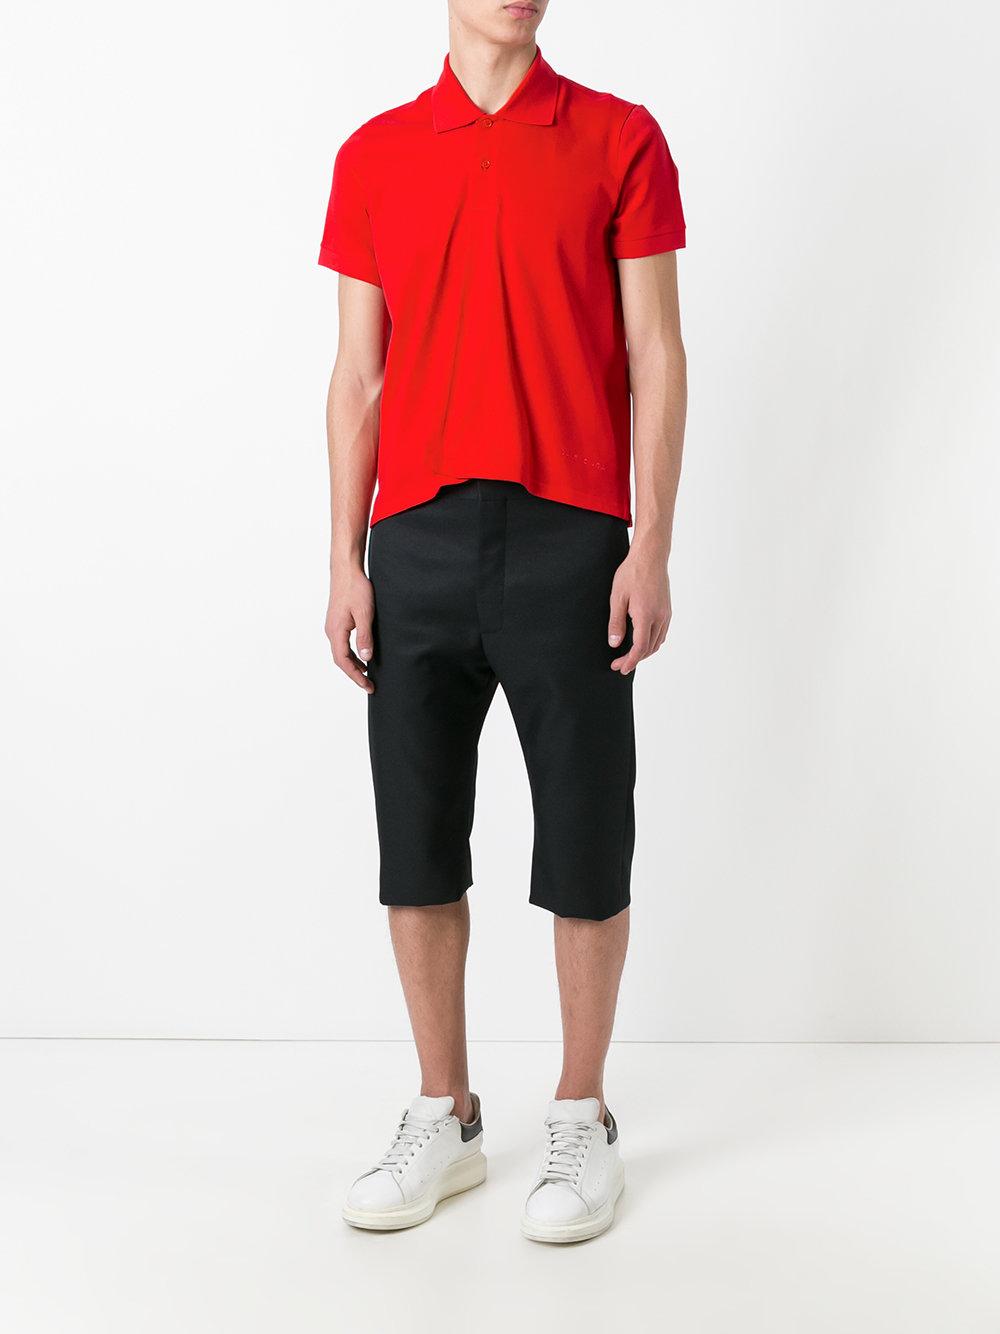 Lyst - Balenciaga - Pleated Polo Shirt - Men - Cotton - S in Red for Men